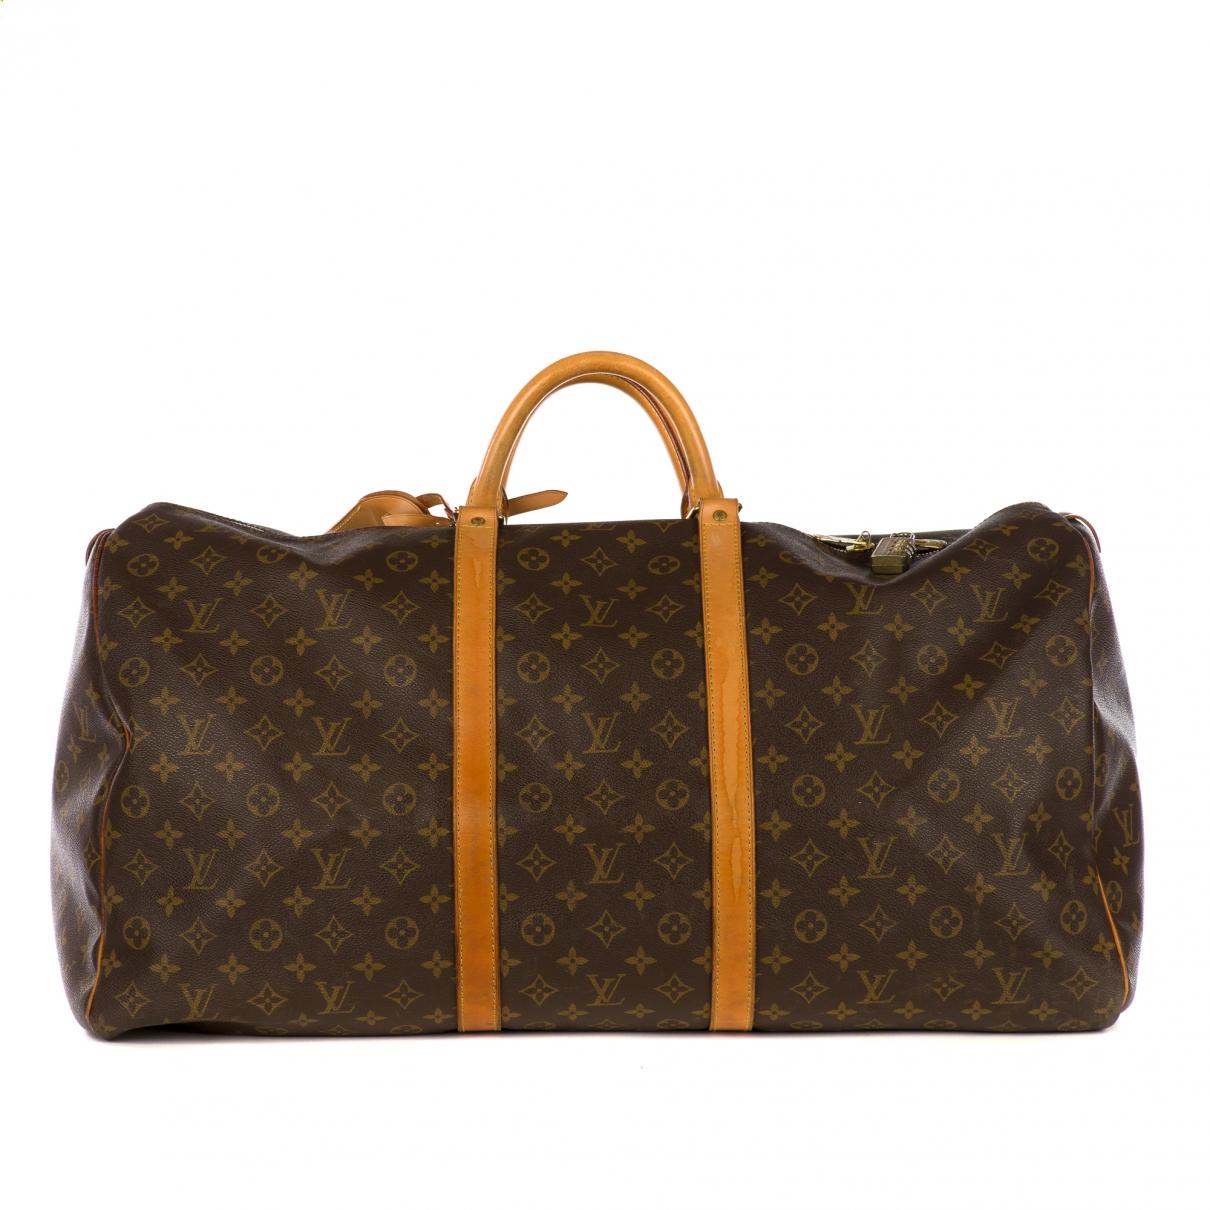 Lyst - Louis Vuitton Pre-owned Keepall Brown Leather Travel Bags in Brown